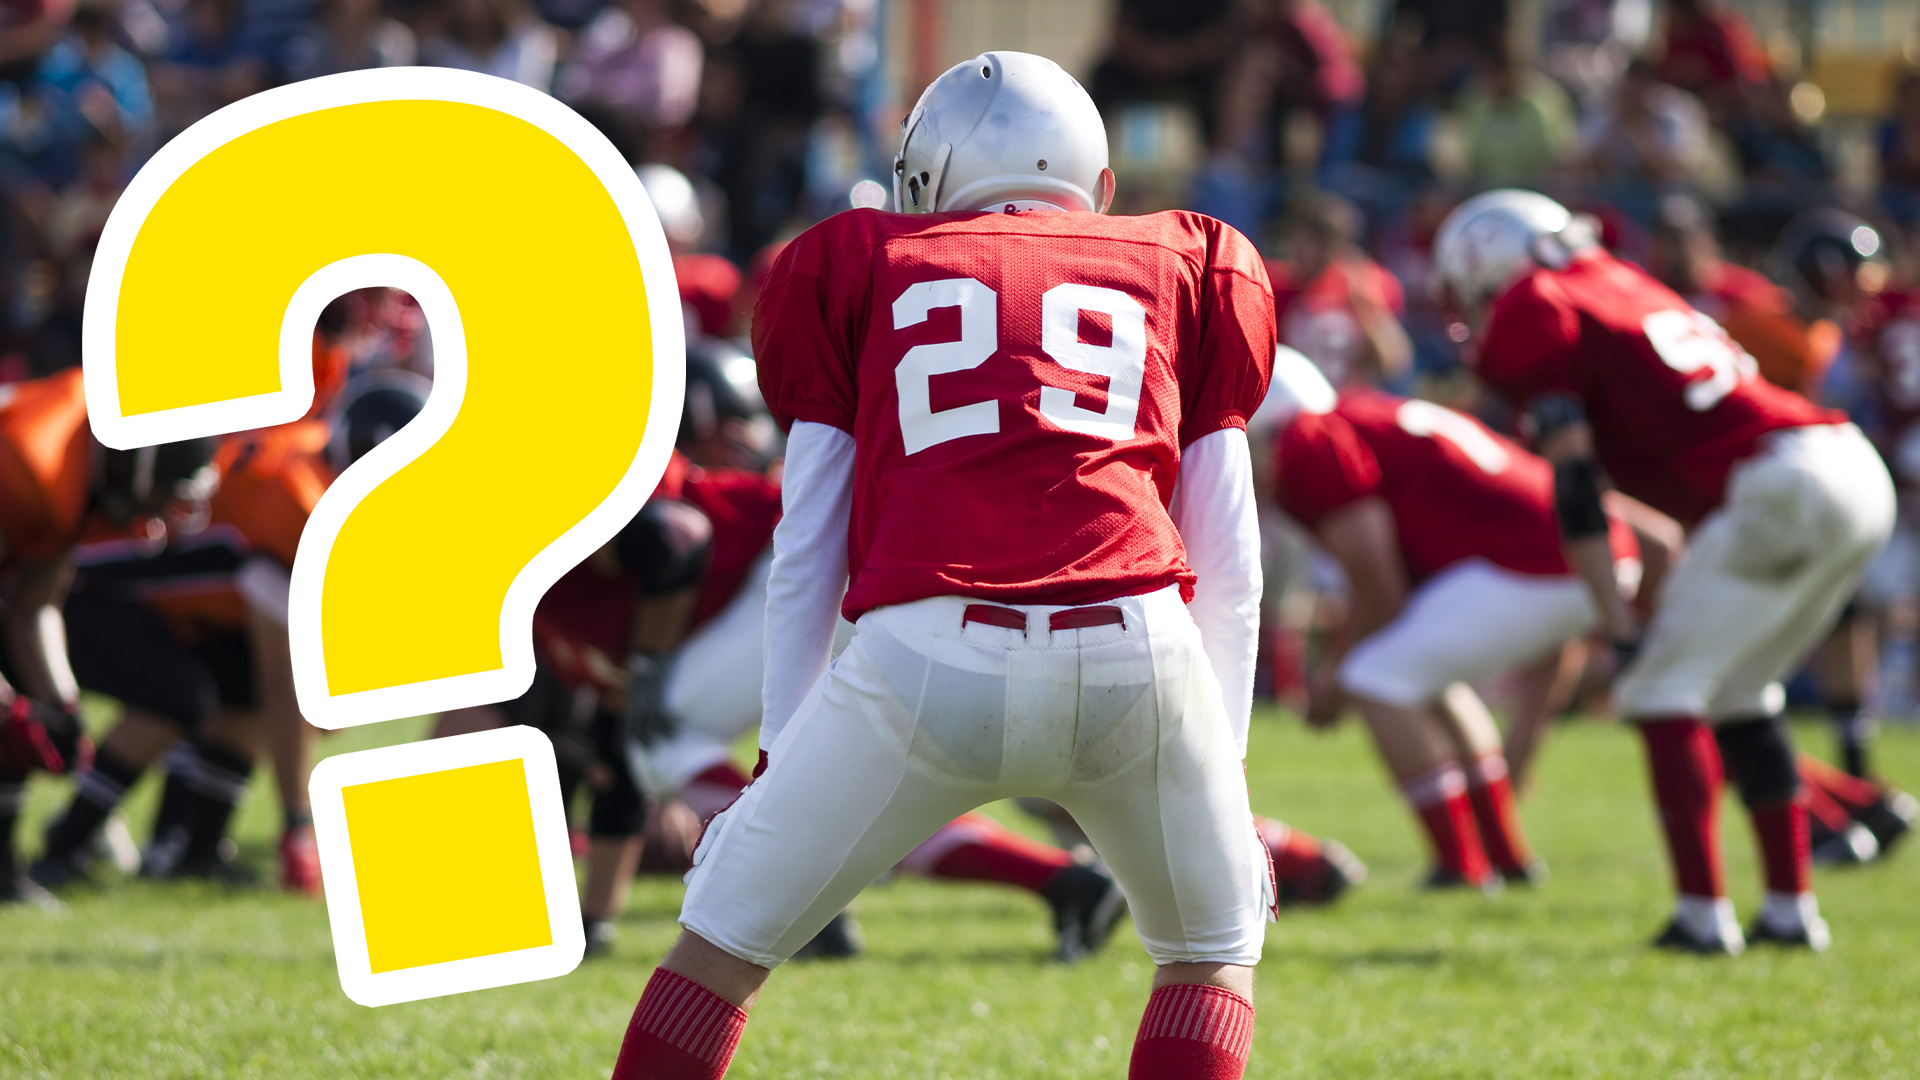 American Football match with question mark 